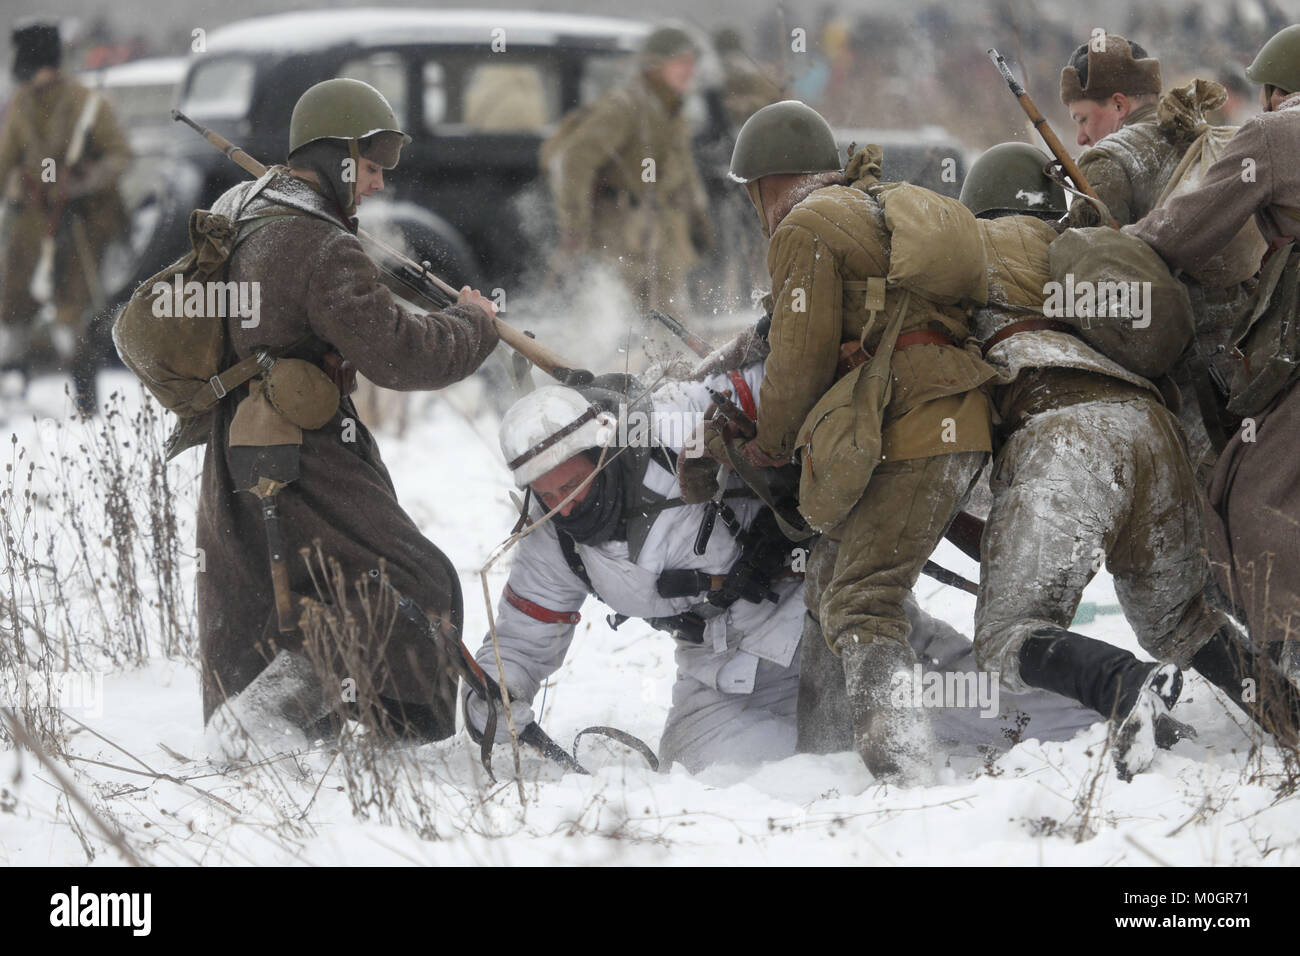 January 21, 2018 - Saint-Petersburg, Russia - Members of historical military clubs wearing Soviet and Nazi army uniforms take a part in the World War II battle reconstruction marking the 75th anniversary of the battle that broke the Siege of Leningrad (now Saint-Petersburg) about 30 kilometers east of the city. Credit: Elena Ignatyeva/ZUMA Wire/Alamy Live News Stock Photo